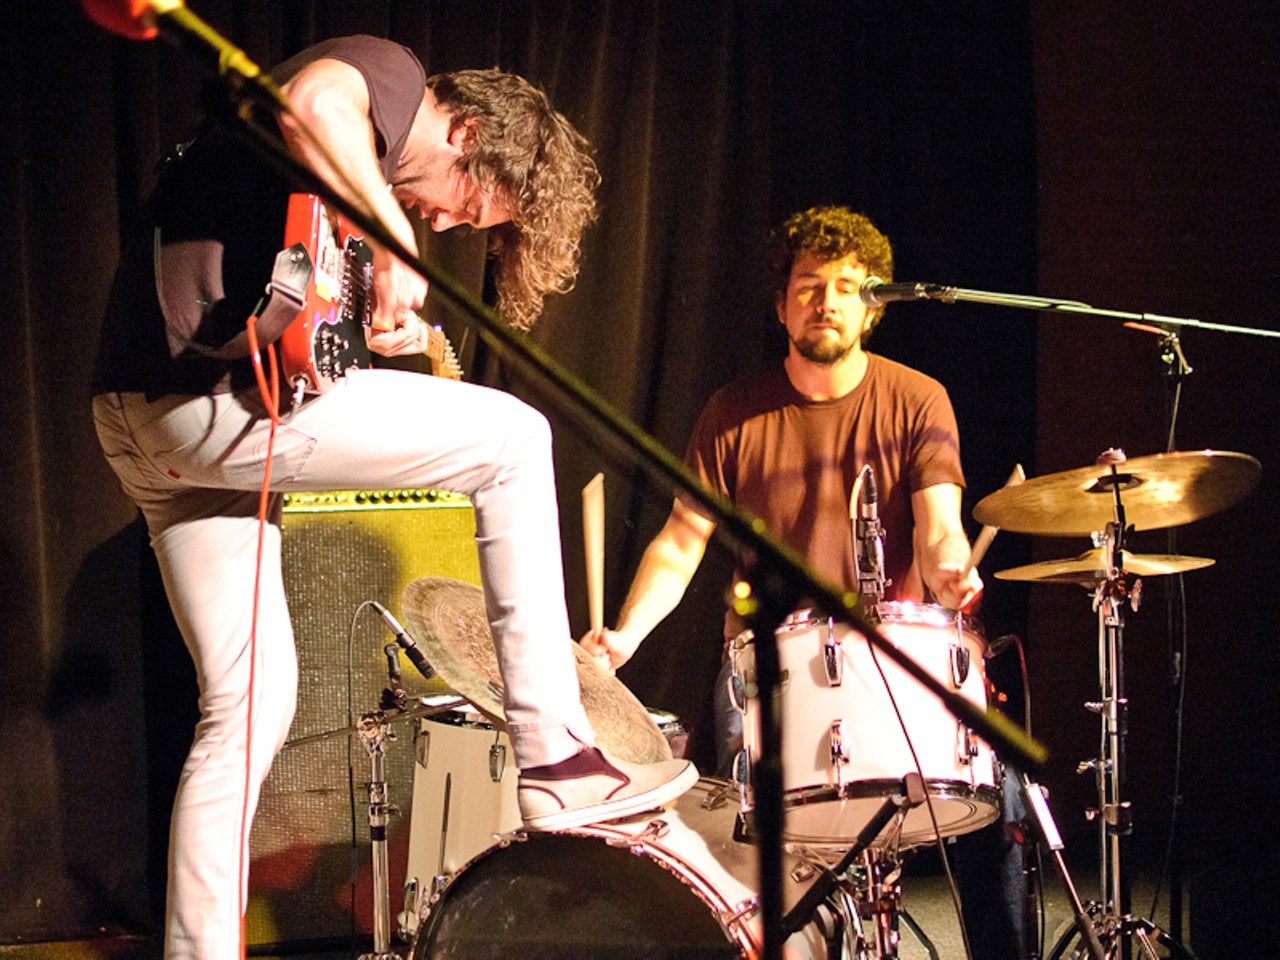 Brian King and David Prowse of Japandroids.